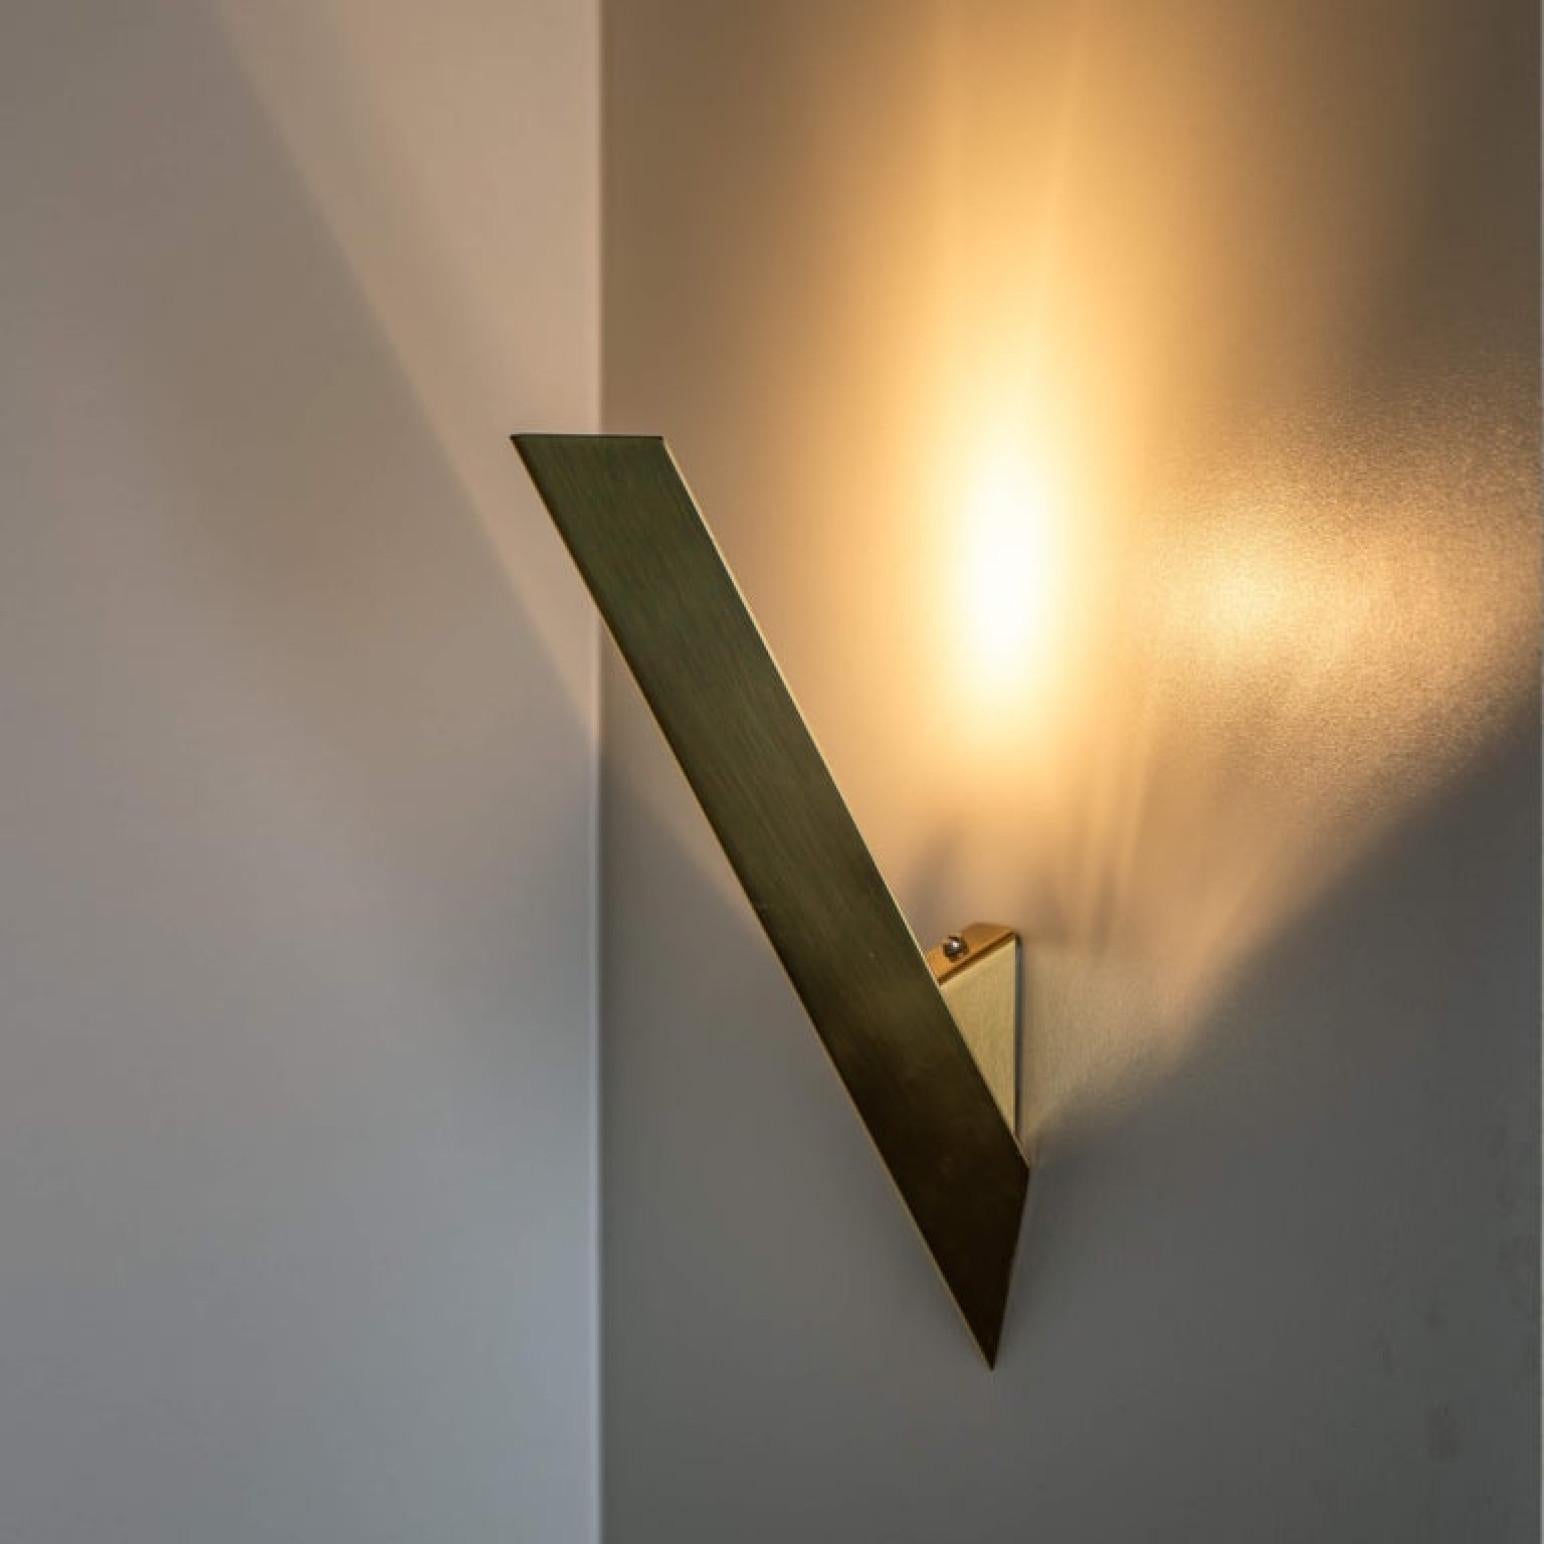 20th Century Pair of Wedge-Shaped High End Wall Lights by J.T. Kalmar, 1970s, Austria For Sale